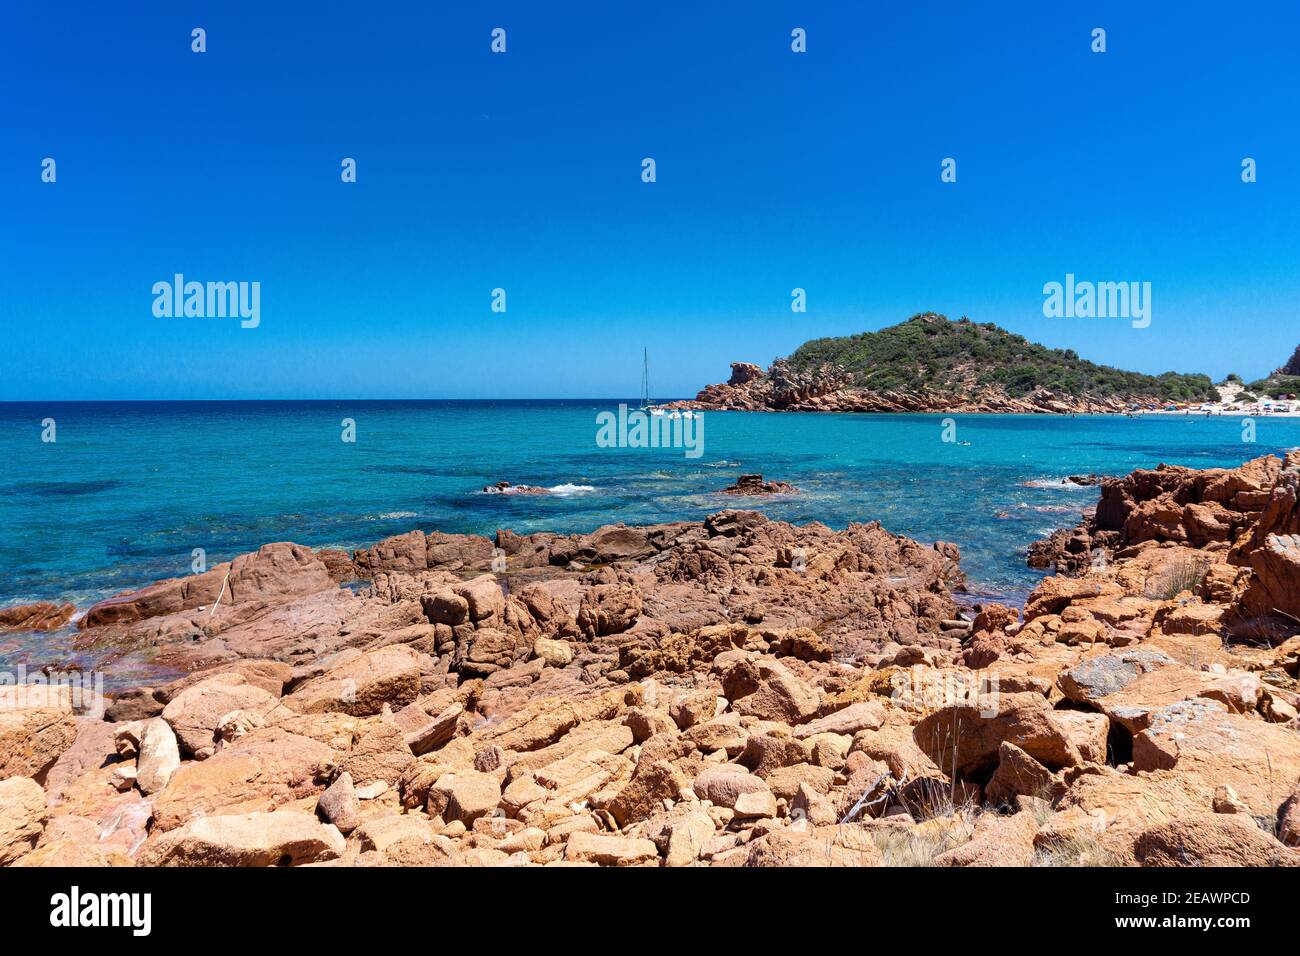 Red rocks, crystal clear water and centuries-old junipers on the beach of Su Sirboni, Sardinia Stock Photo